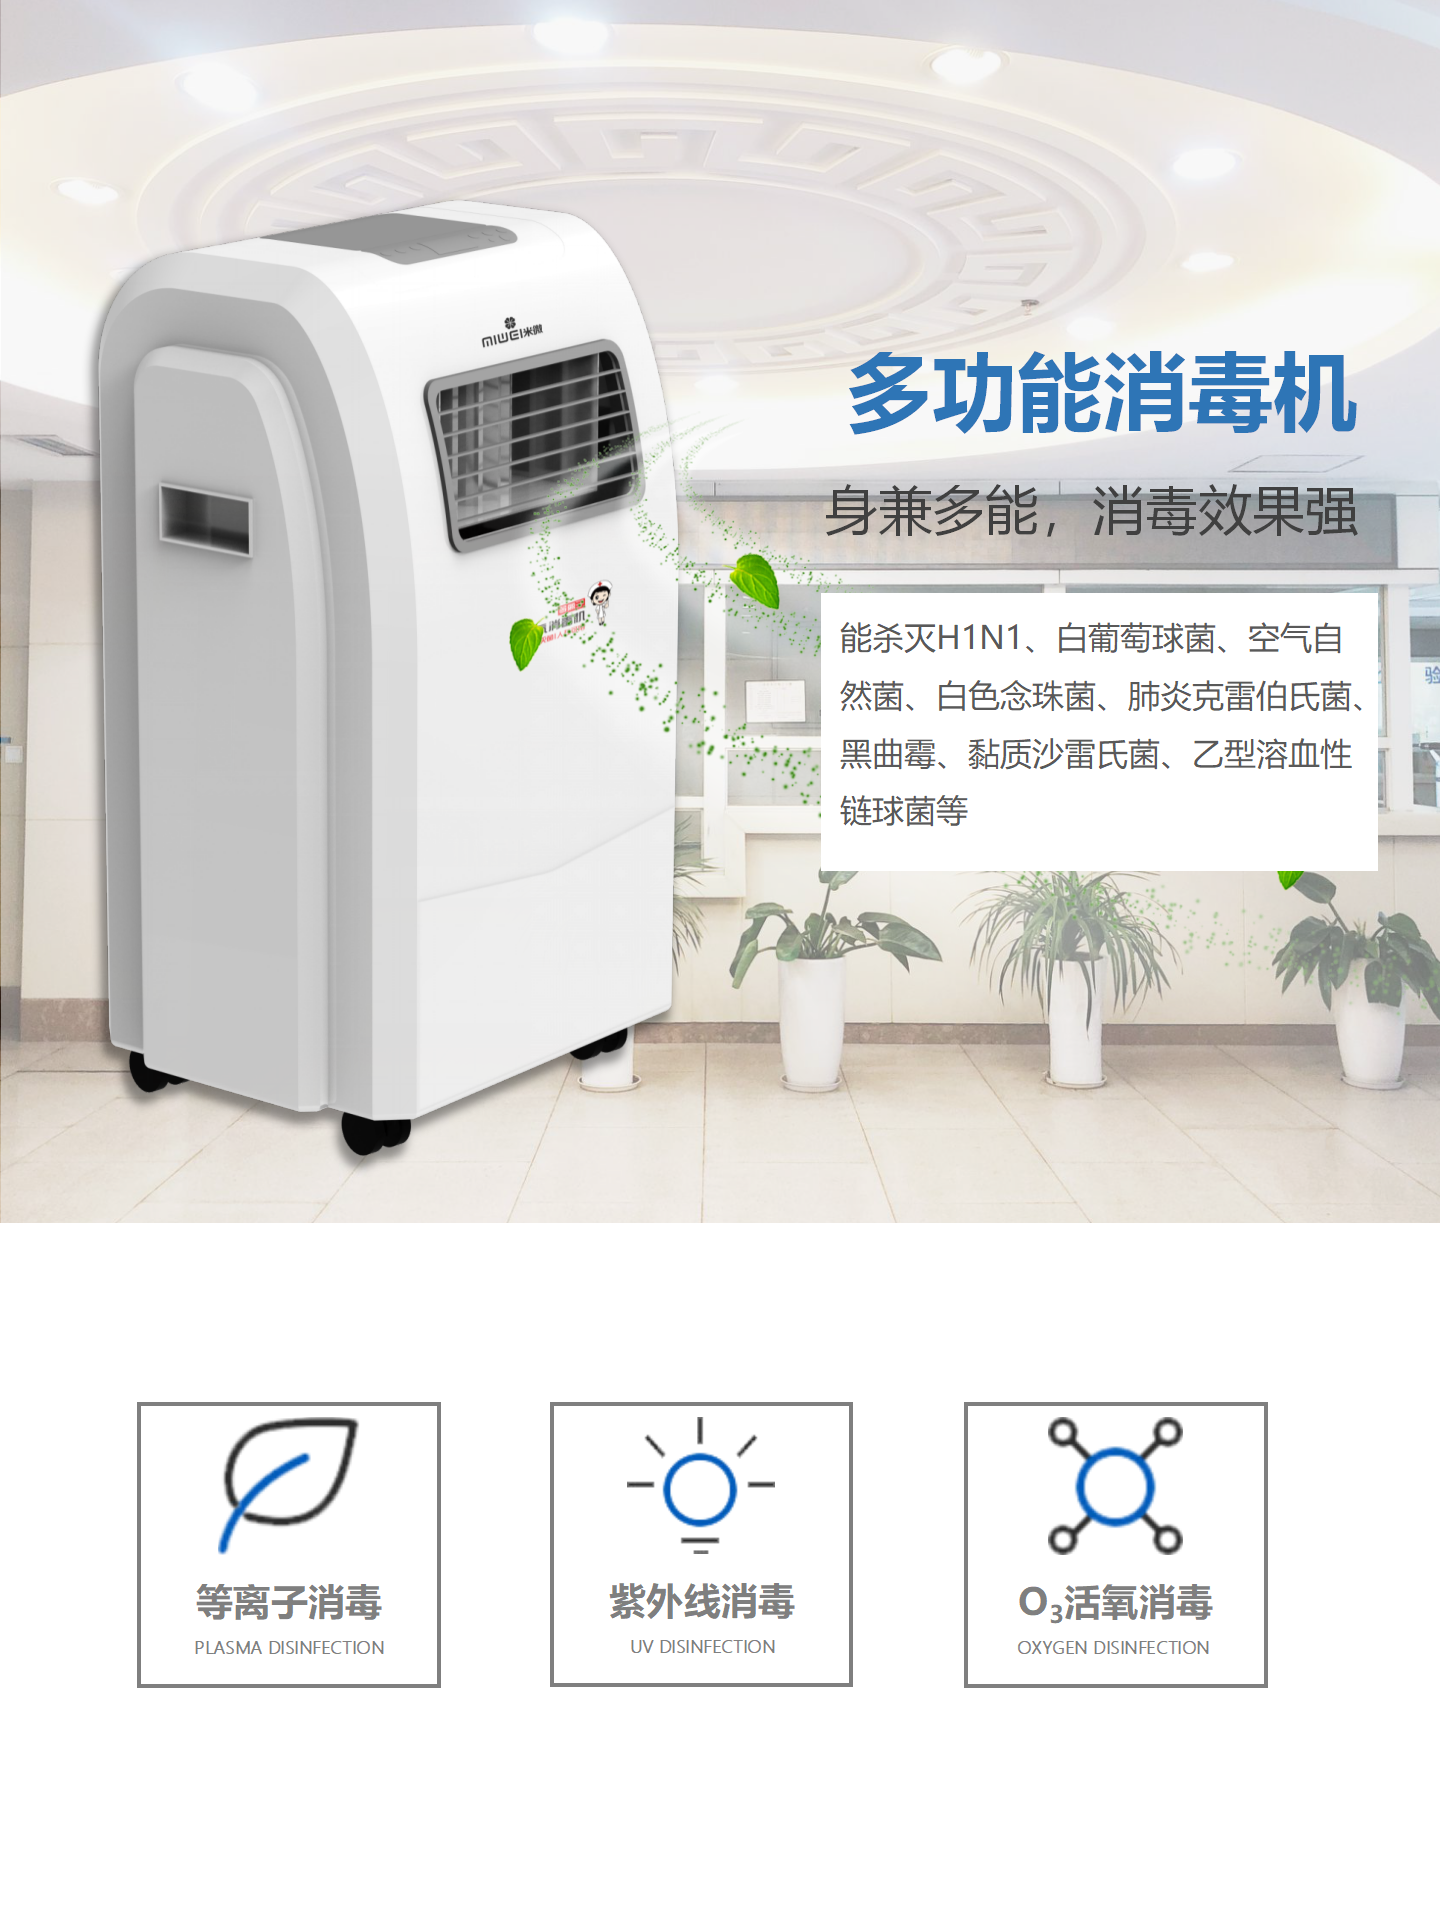 Mi Micro Mobile Plasma Air Disinfection Machine has complete qualifications for disinfection and sterilization with high air volume